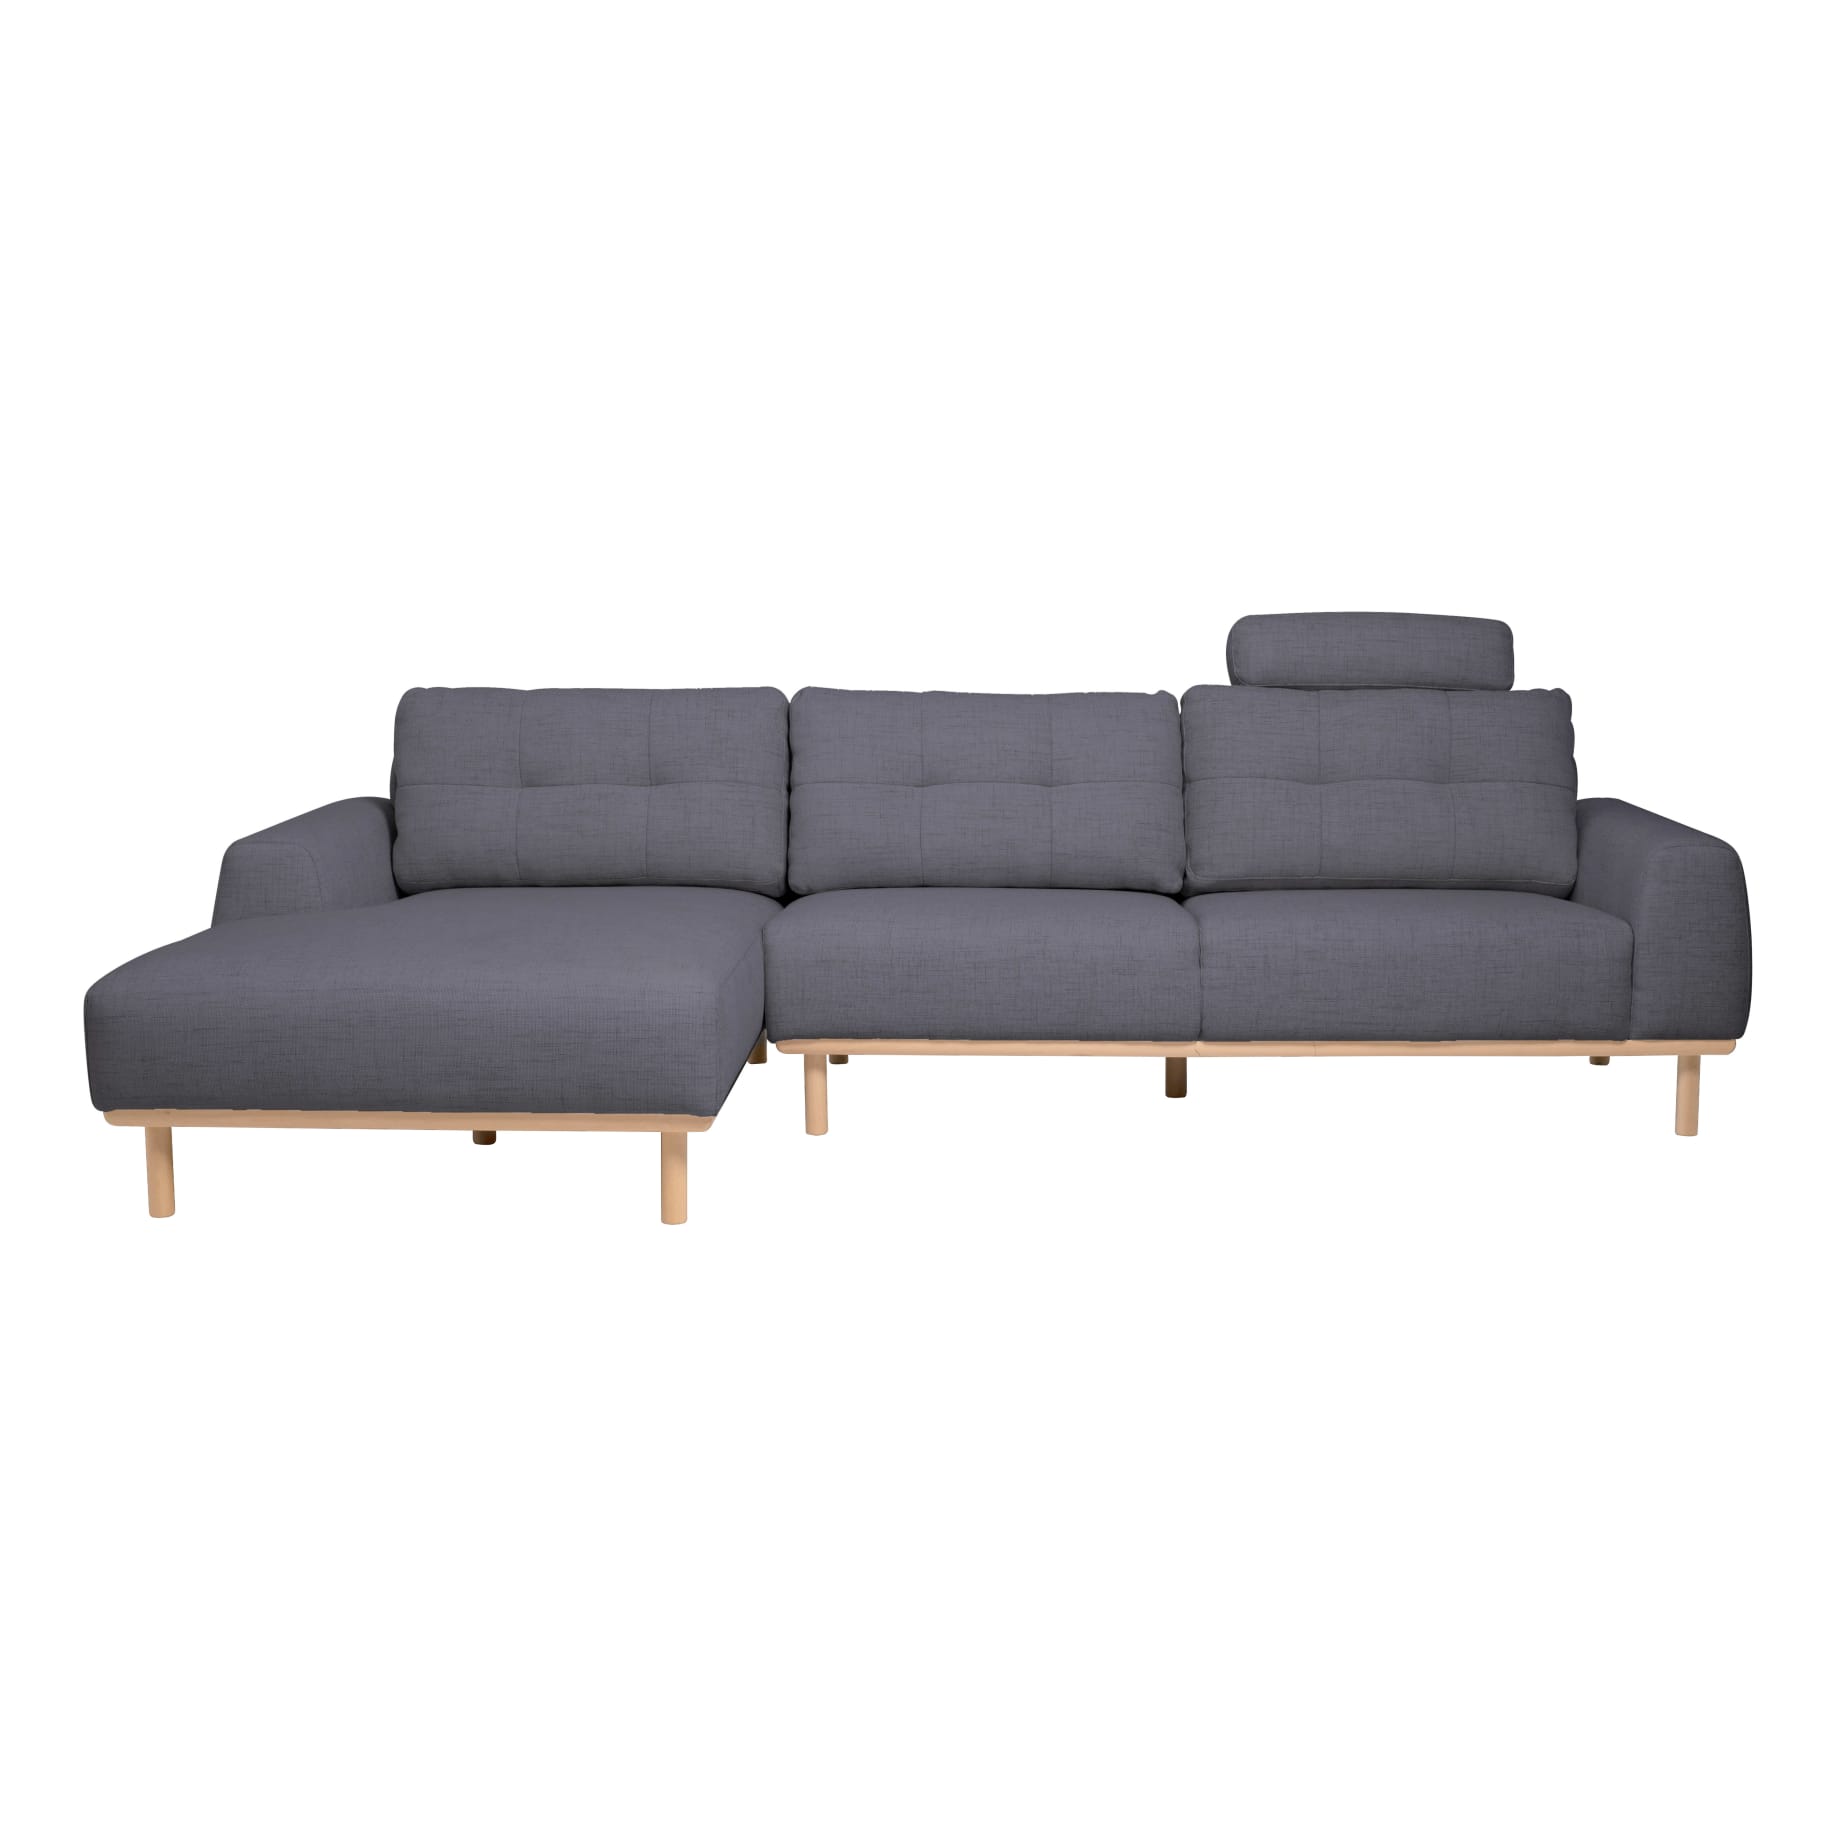 Stratton 3 Seater+Chaise LHF in Cloud Storm